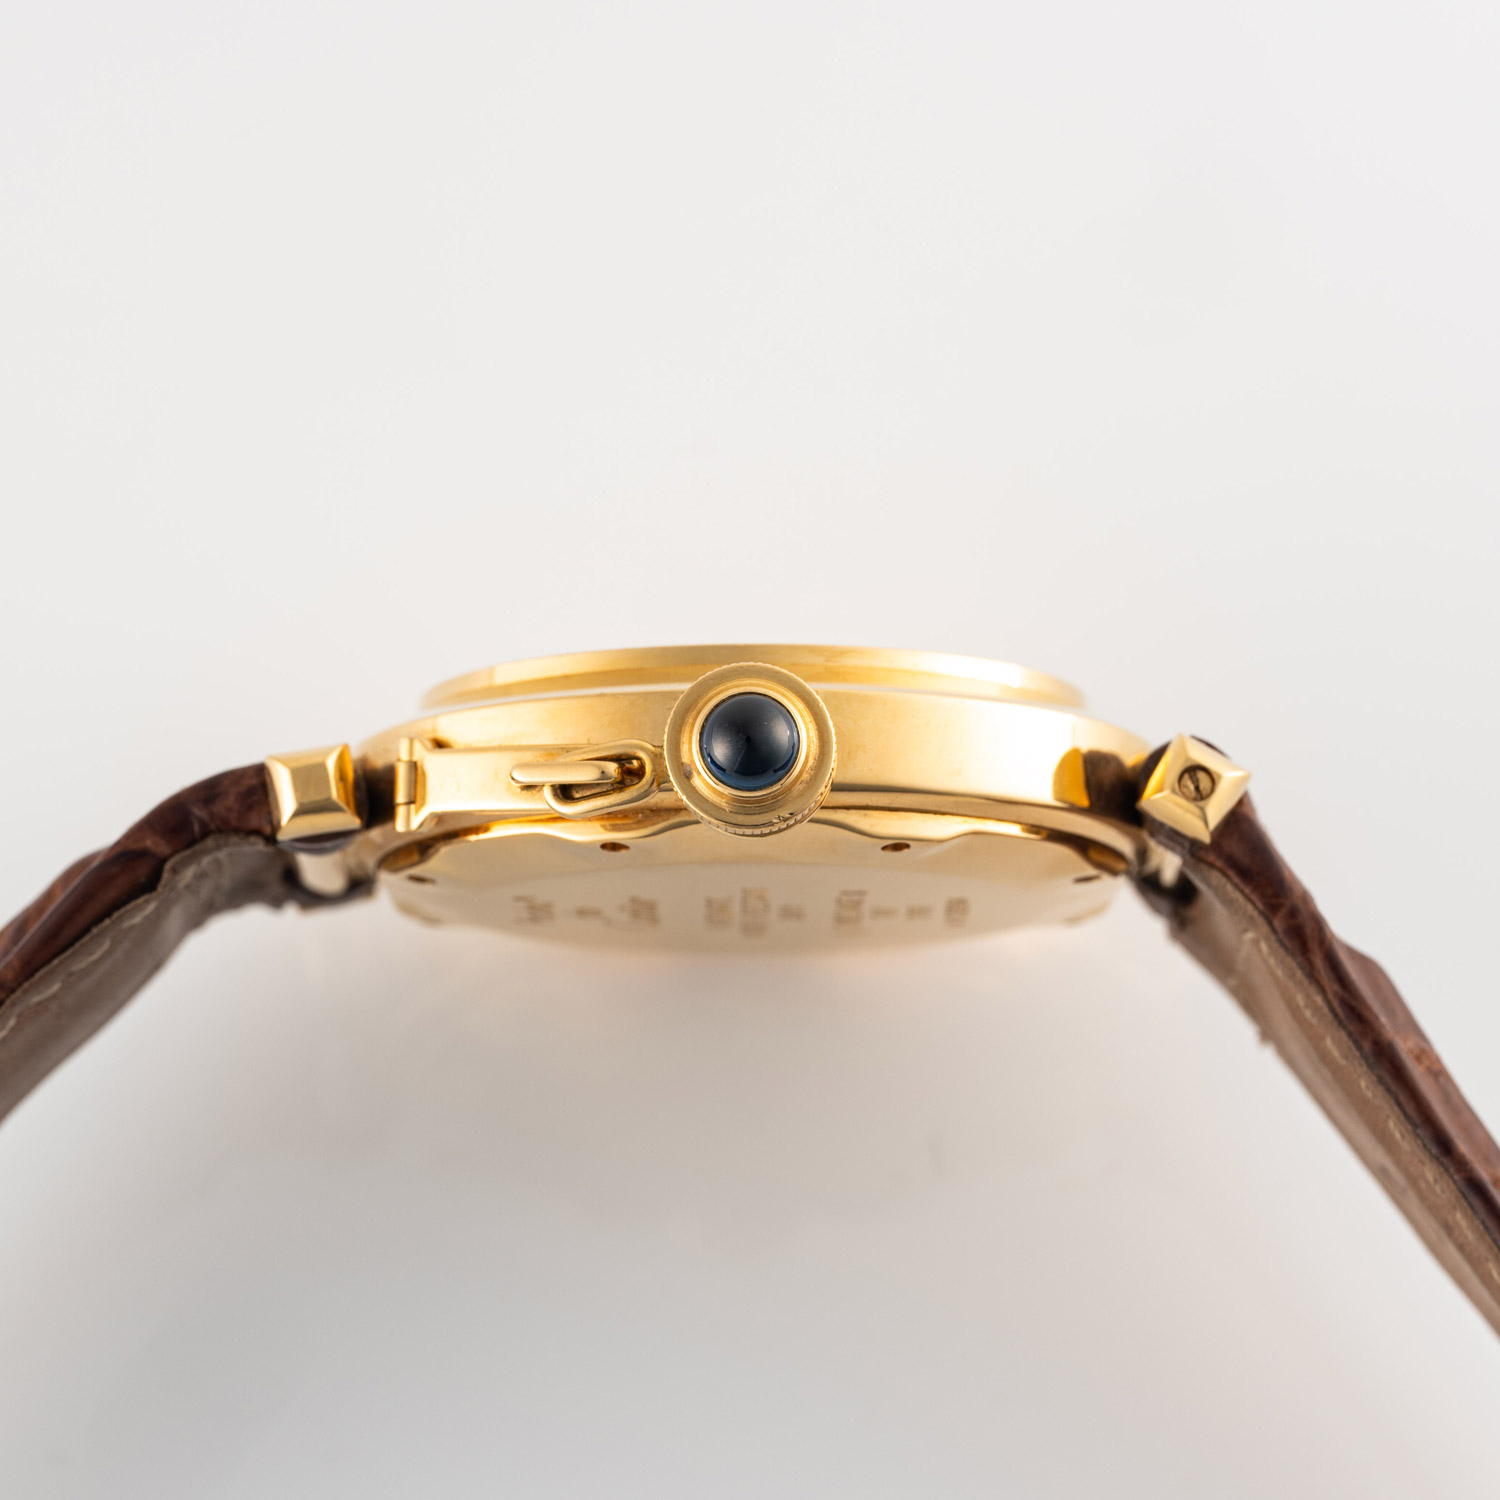 A GENTLEMAN'S SIZE 18K SOLID YELLOW GOLD CARTIER PASHA AUTOMATIC WRIST WATCH CIRCA 1990s, REF. - Image 5 of 7